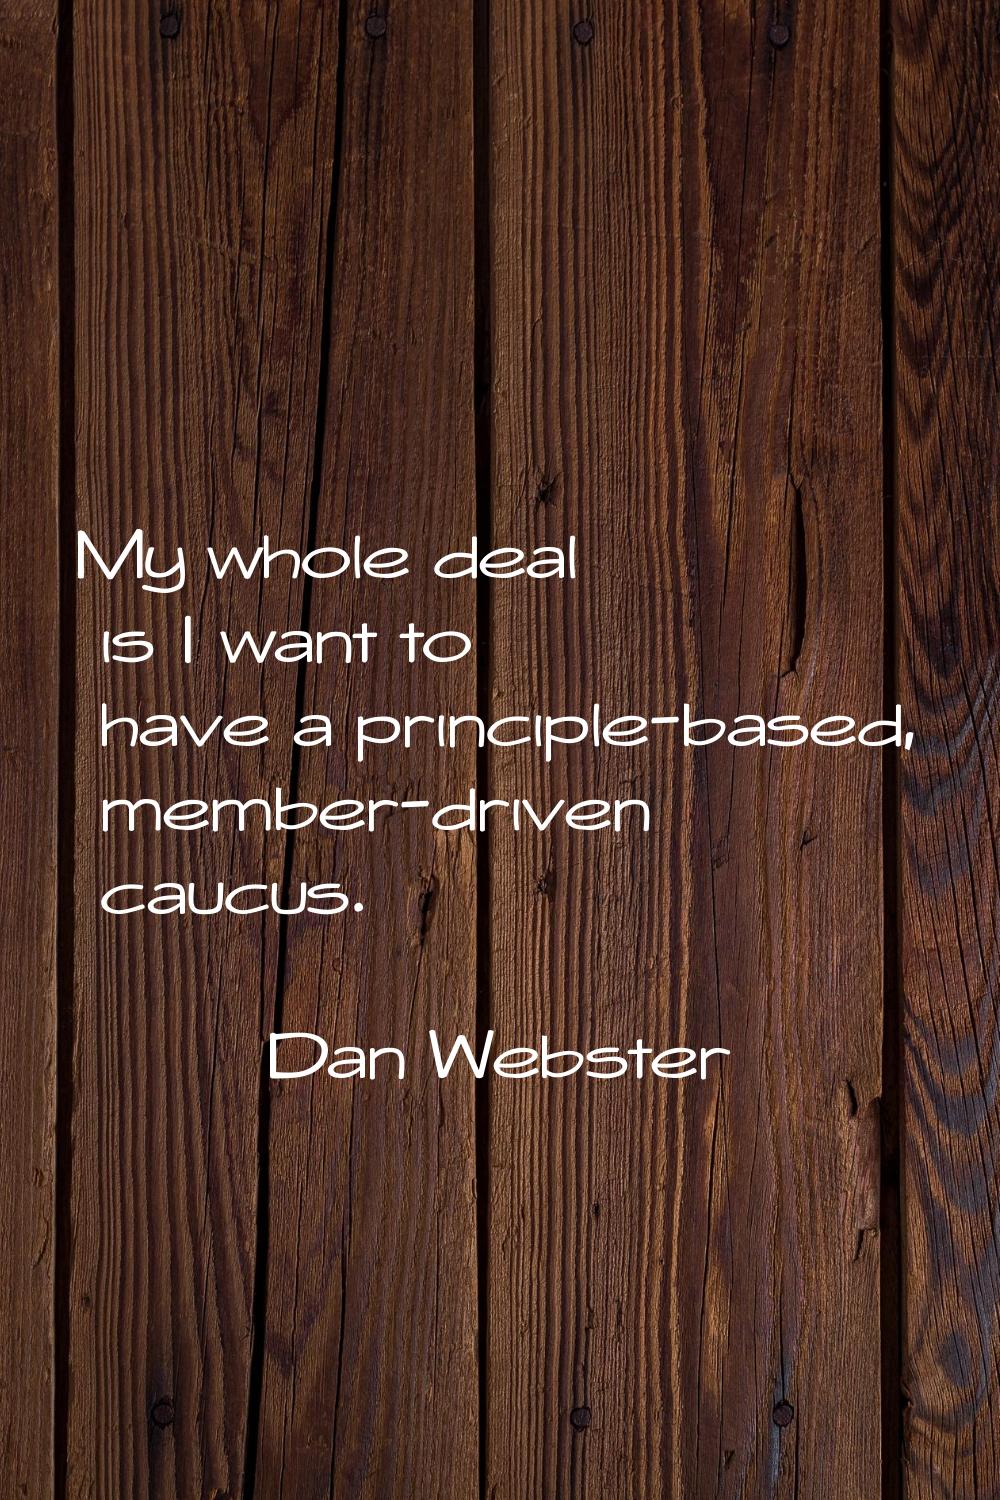 My whole deal is I want to have a principle-based, member-driven caucus.